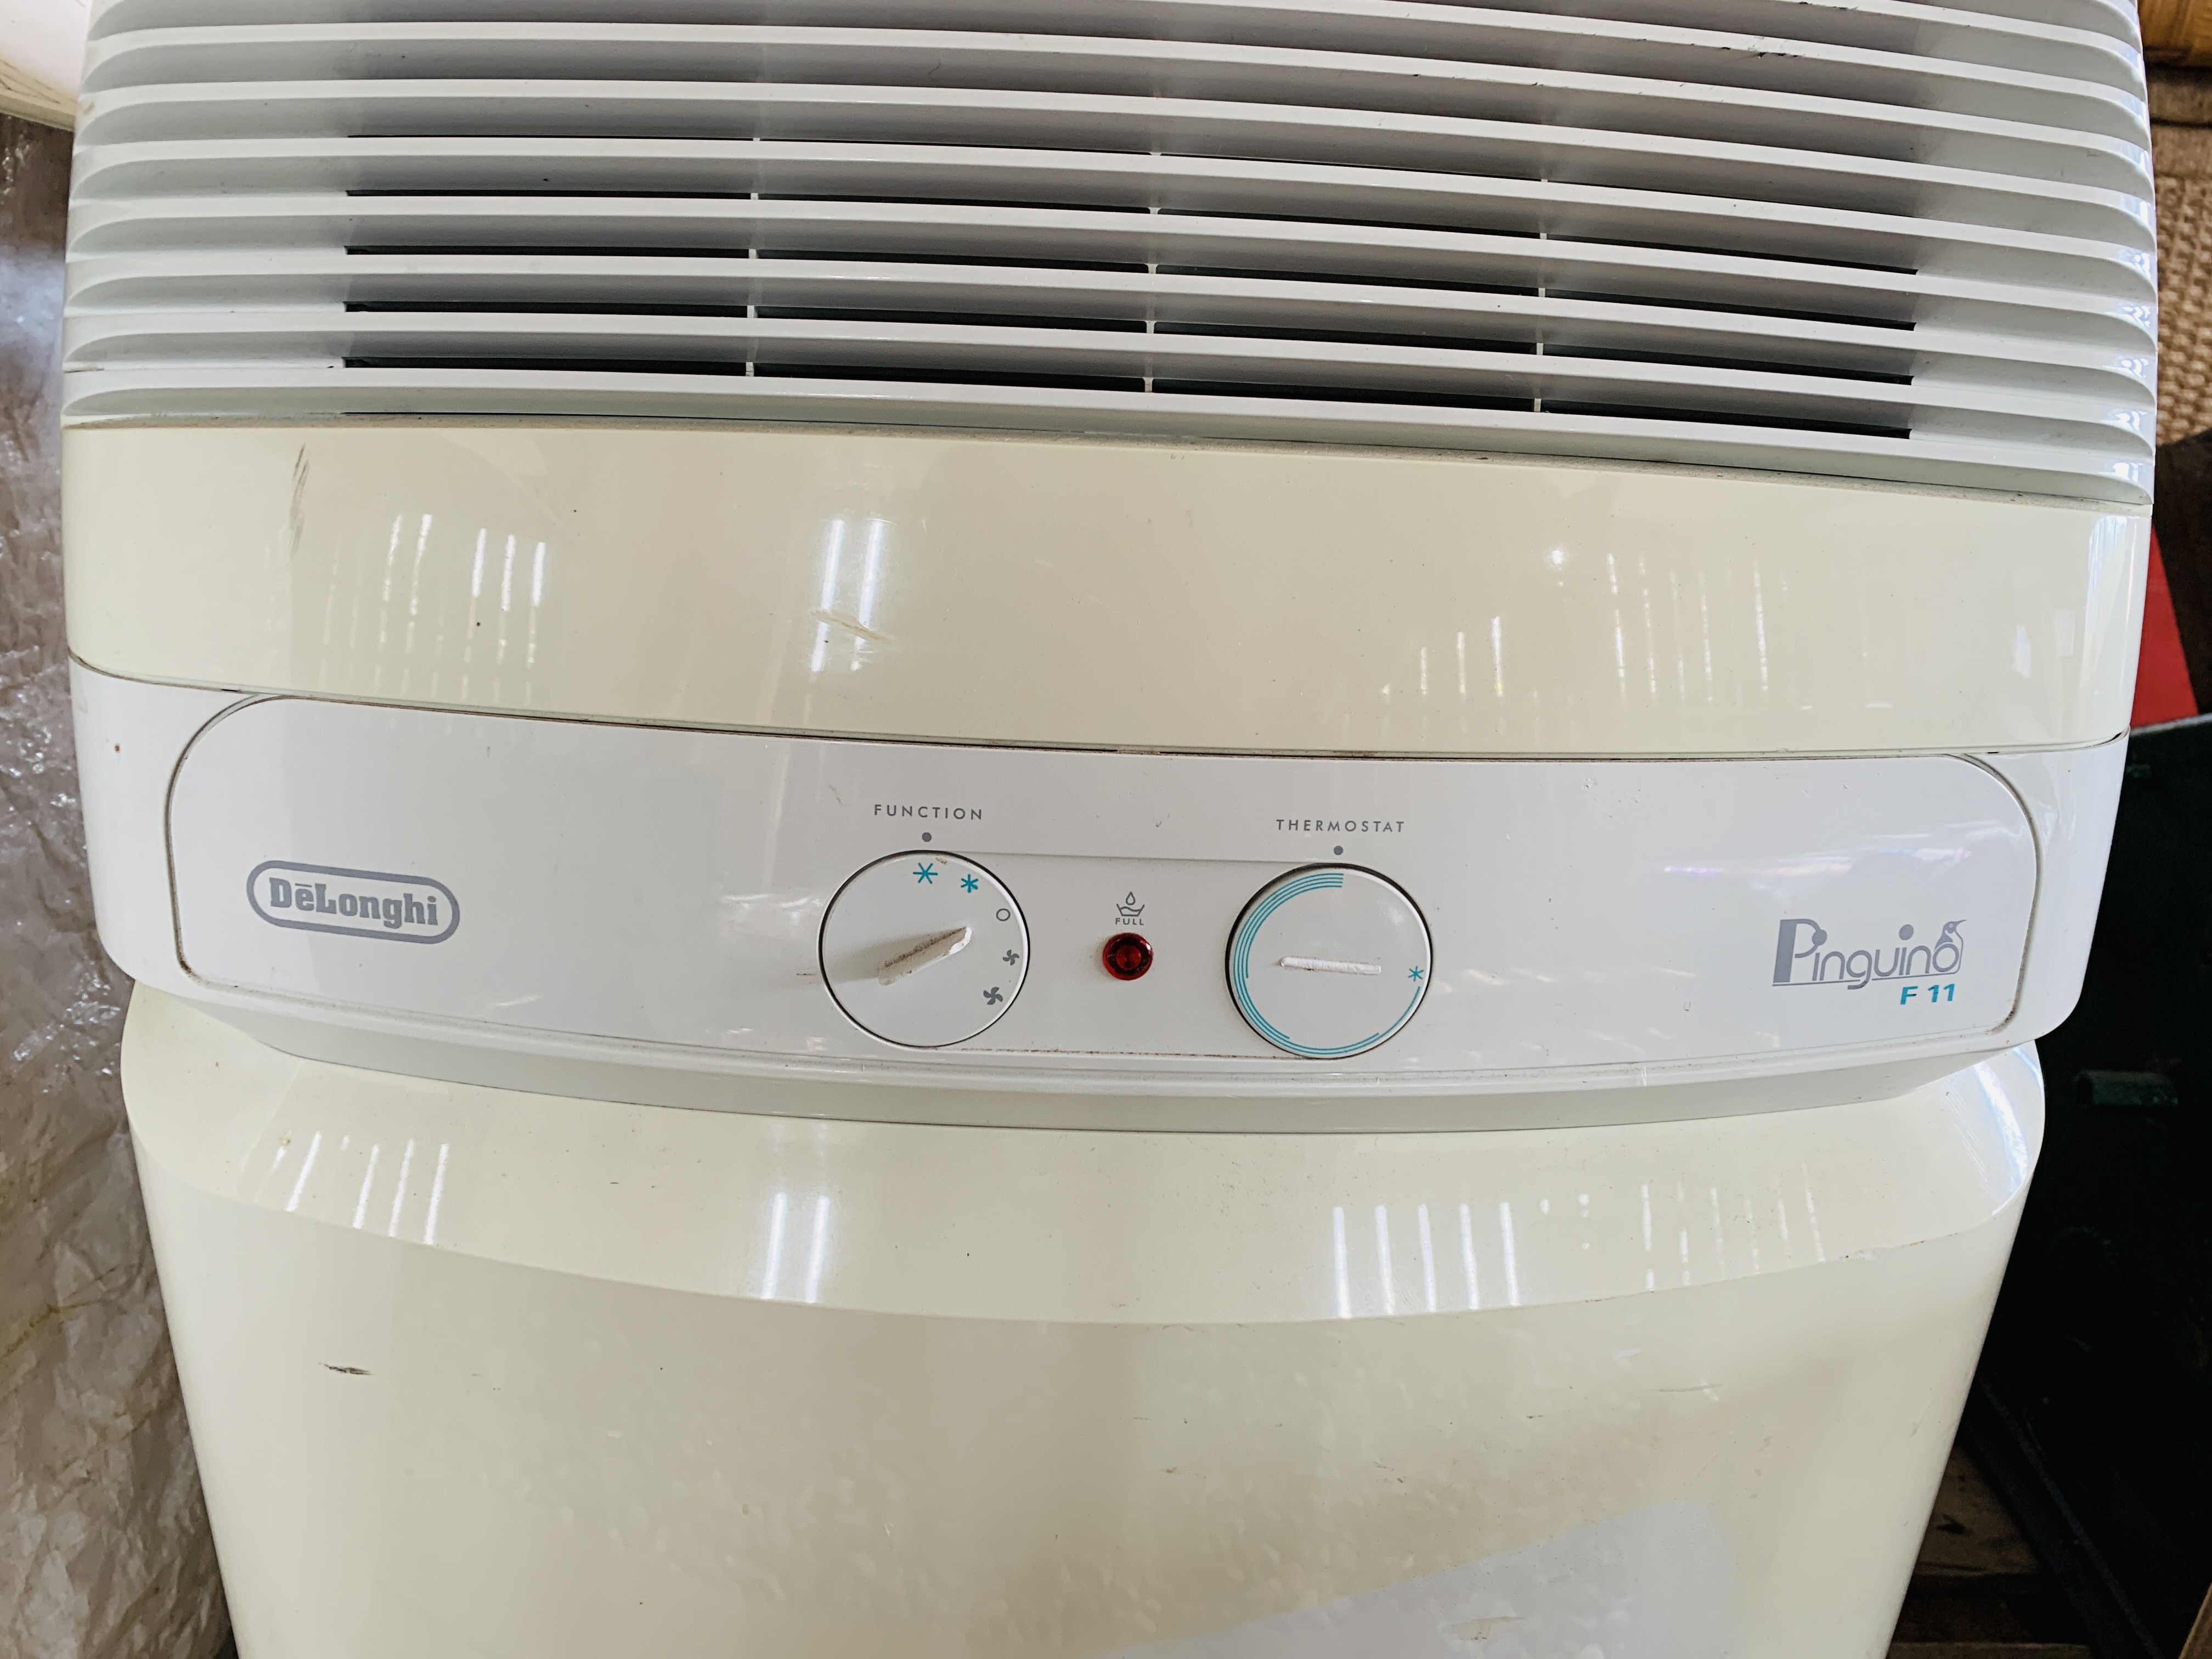 A DELONGHI PINGUINO F11 PORTABLE AIR CONDITIONING UNIT - SOLD AS SEEN - Image 3 of 4